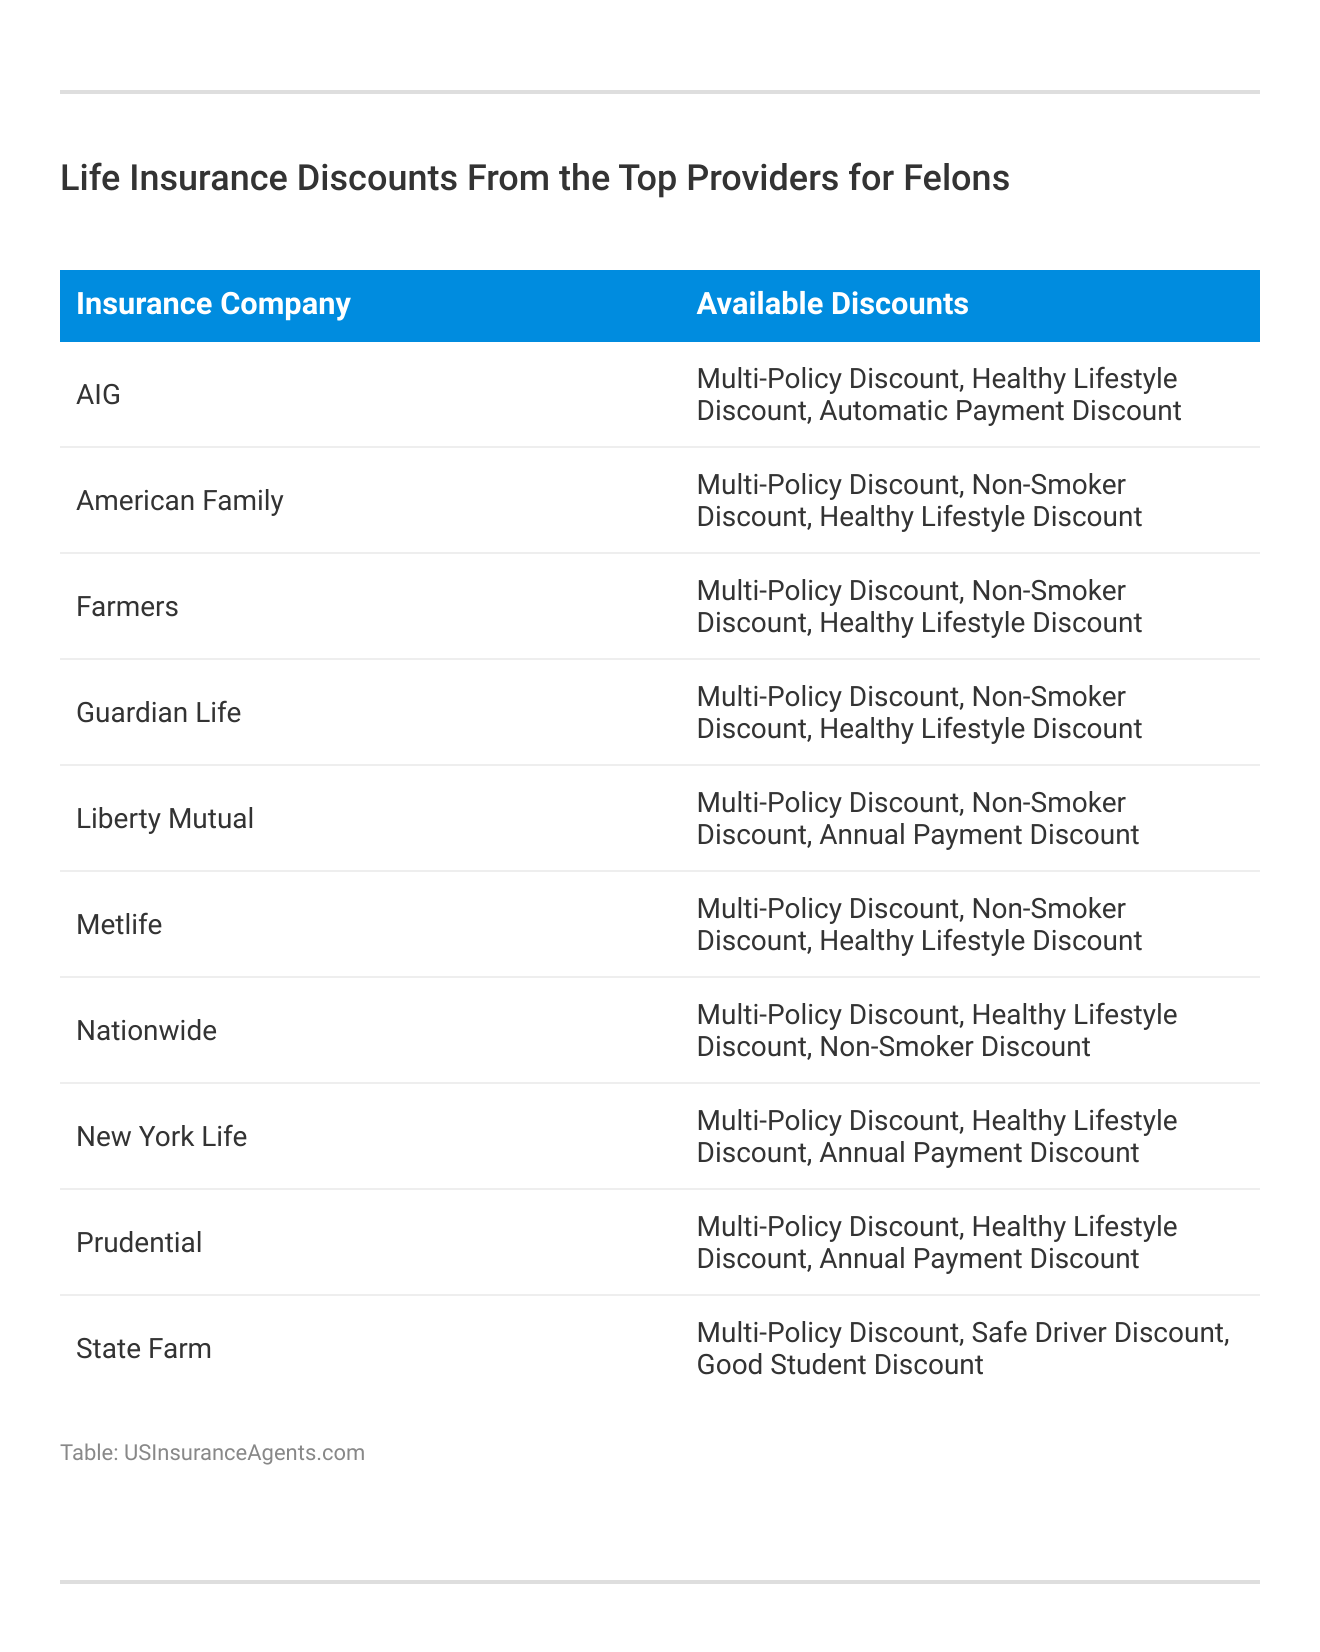 <h3>Life Insurance Discounts From the Top Providers for Felons</h3>